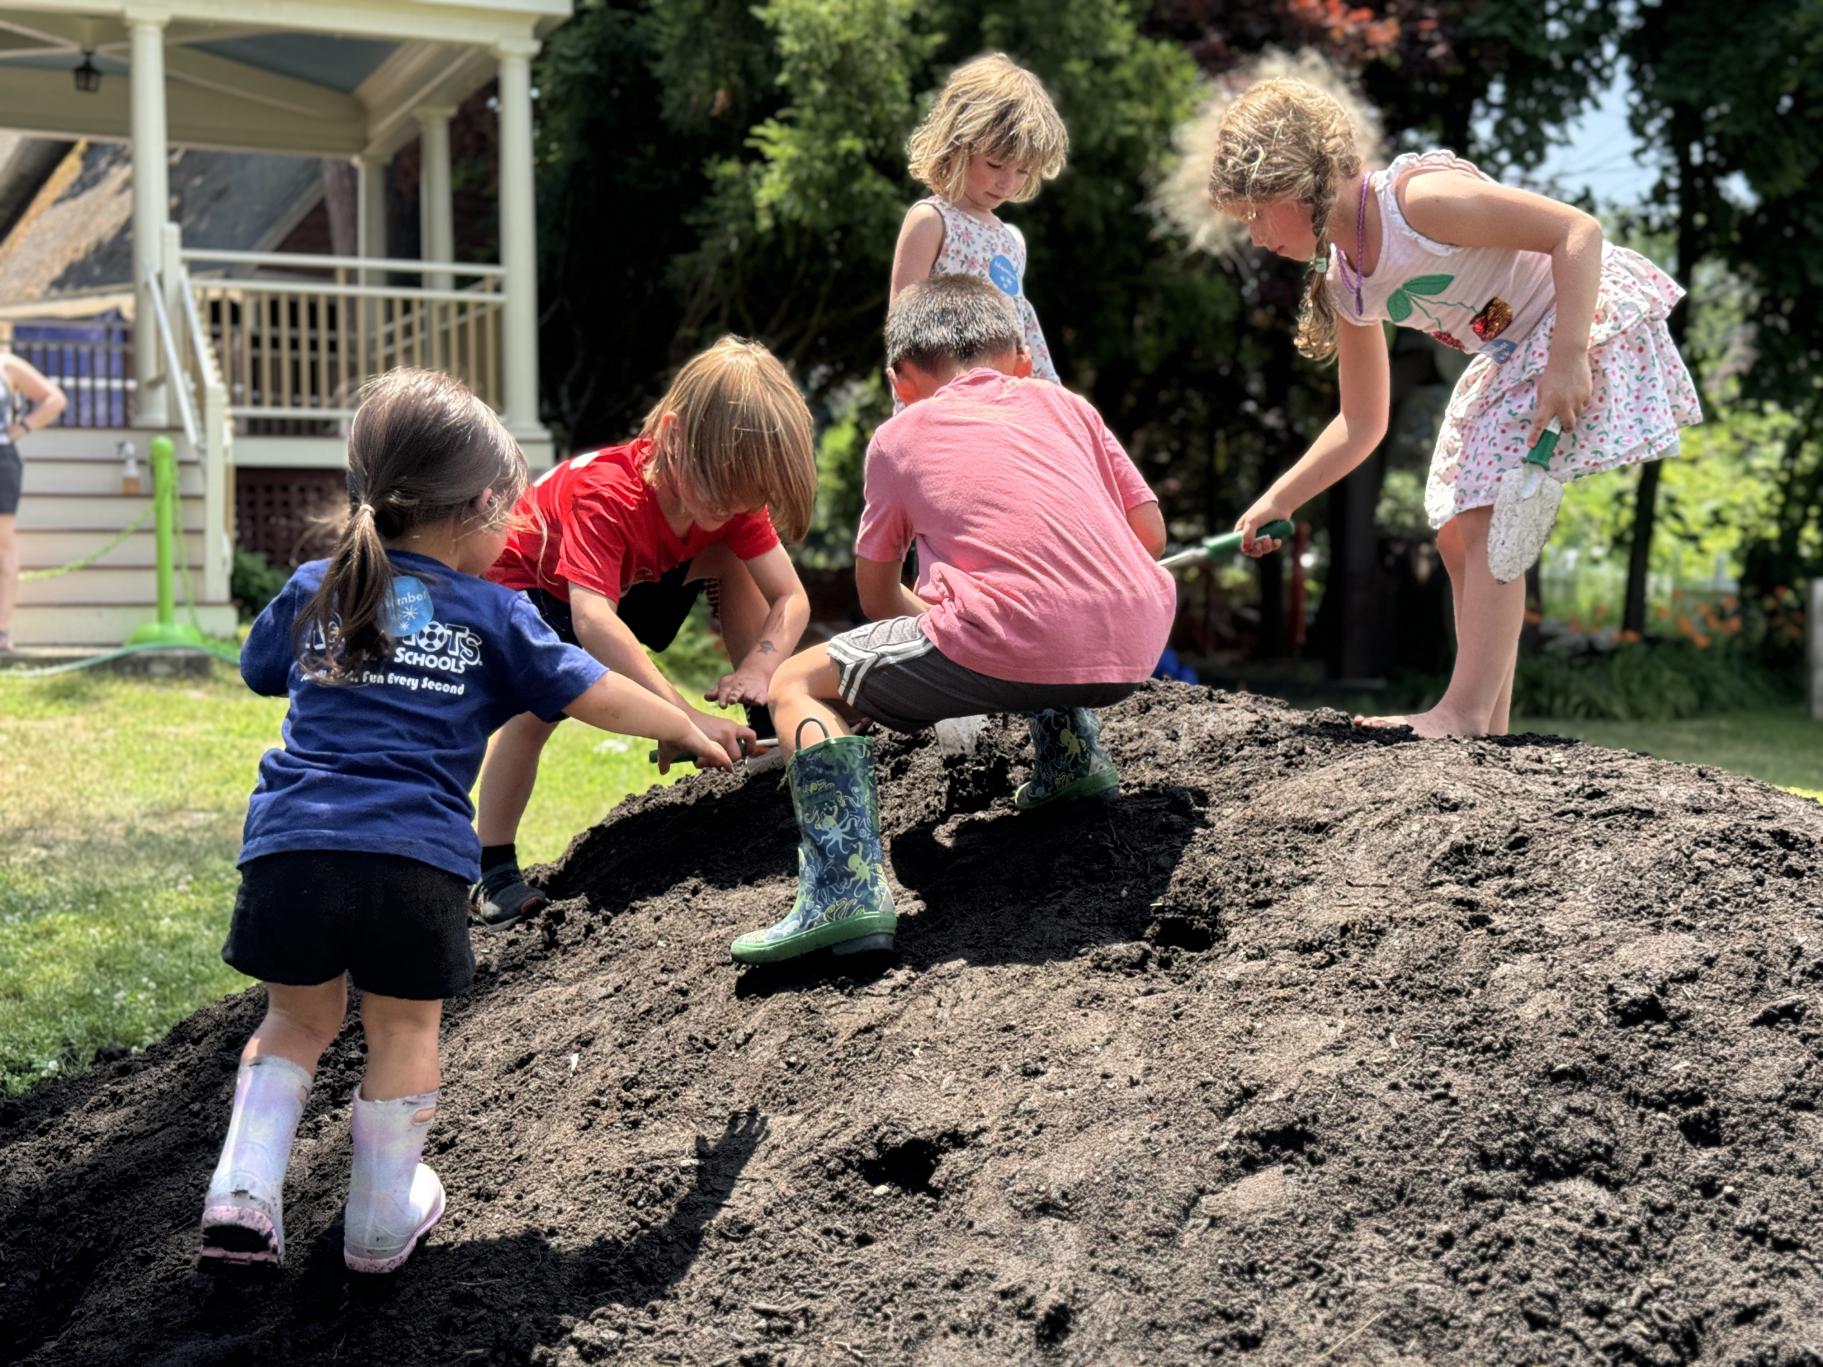 several children explore a giant pile of dirt together